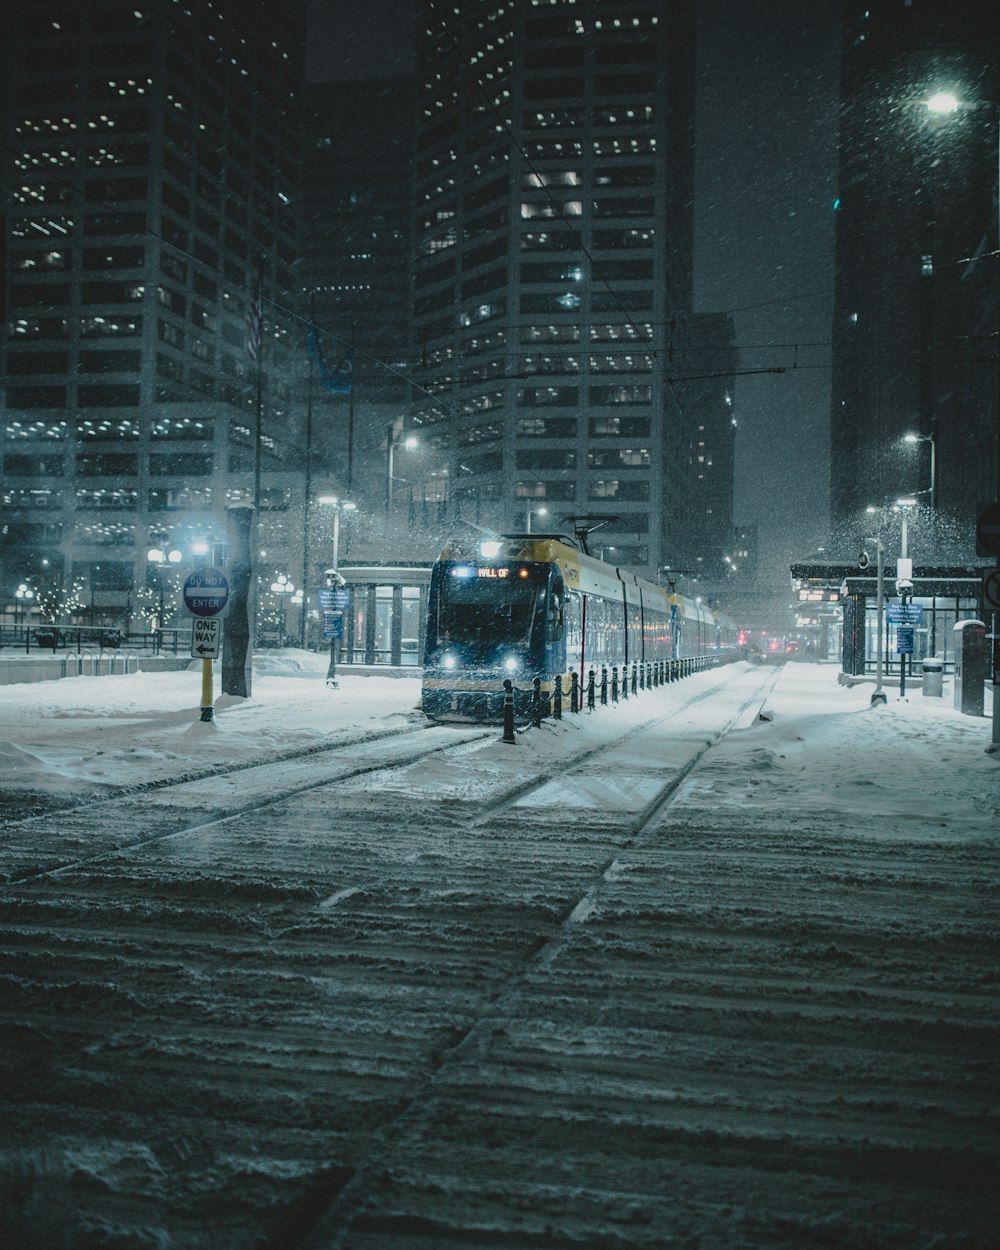 train on track at night during a snowy weather